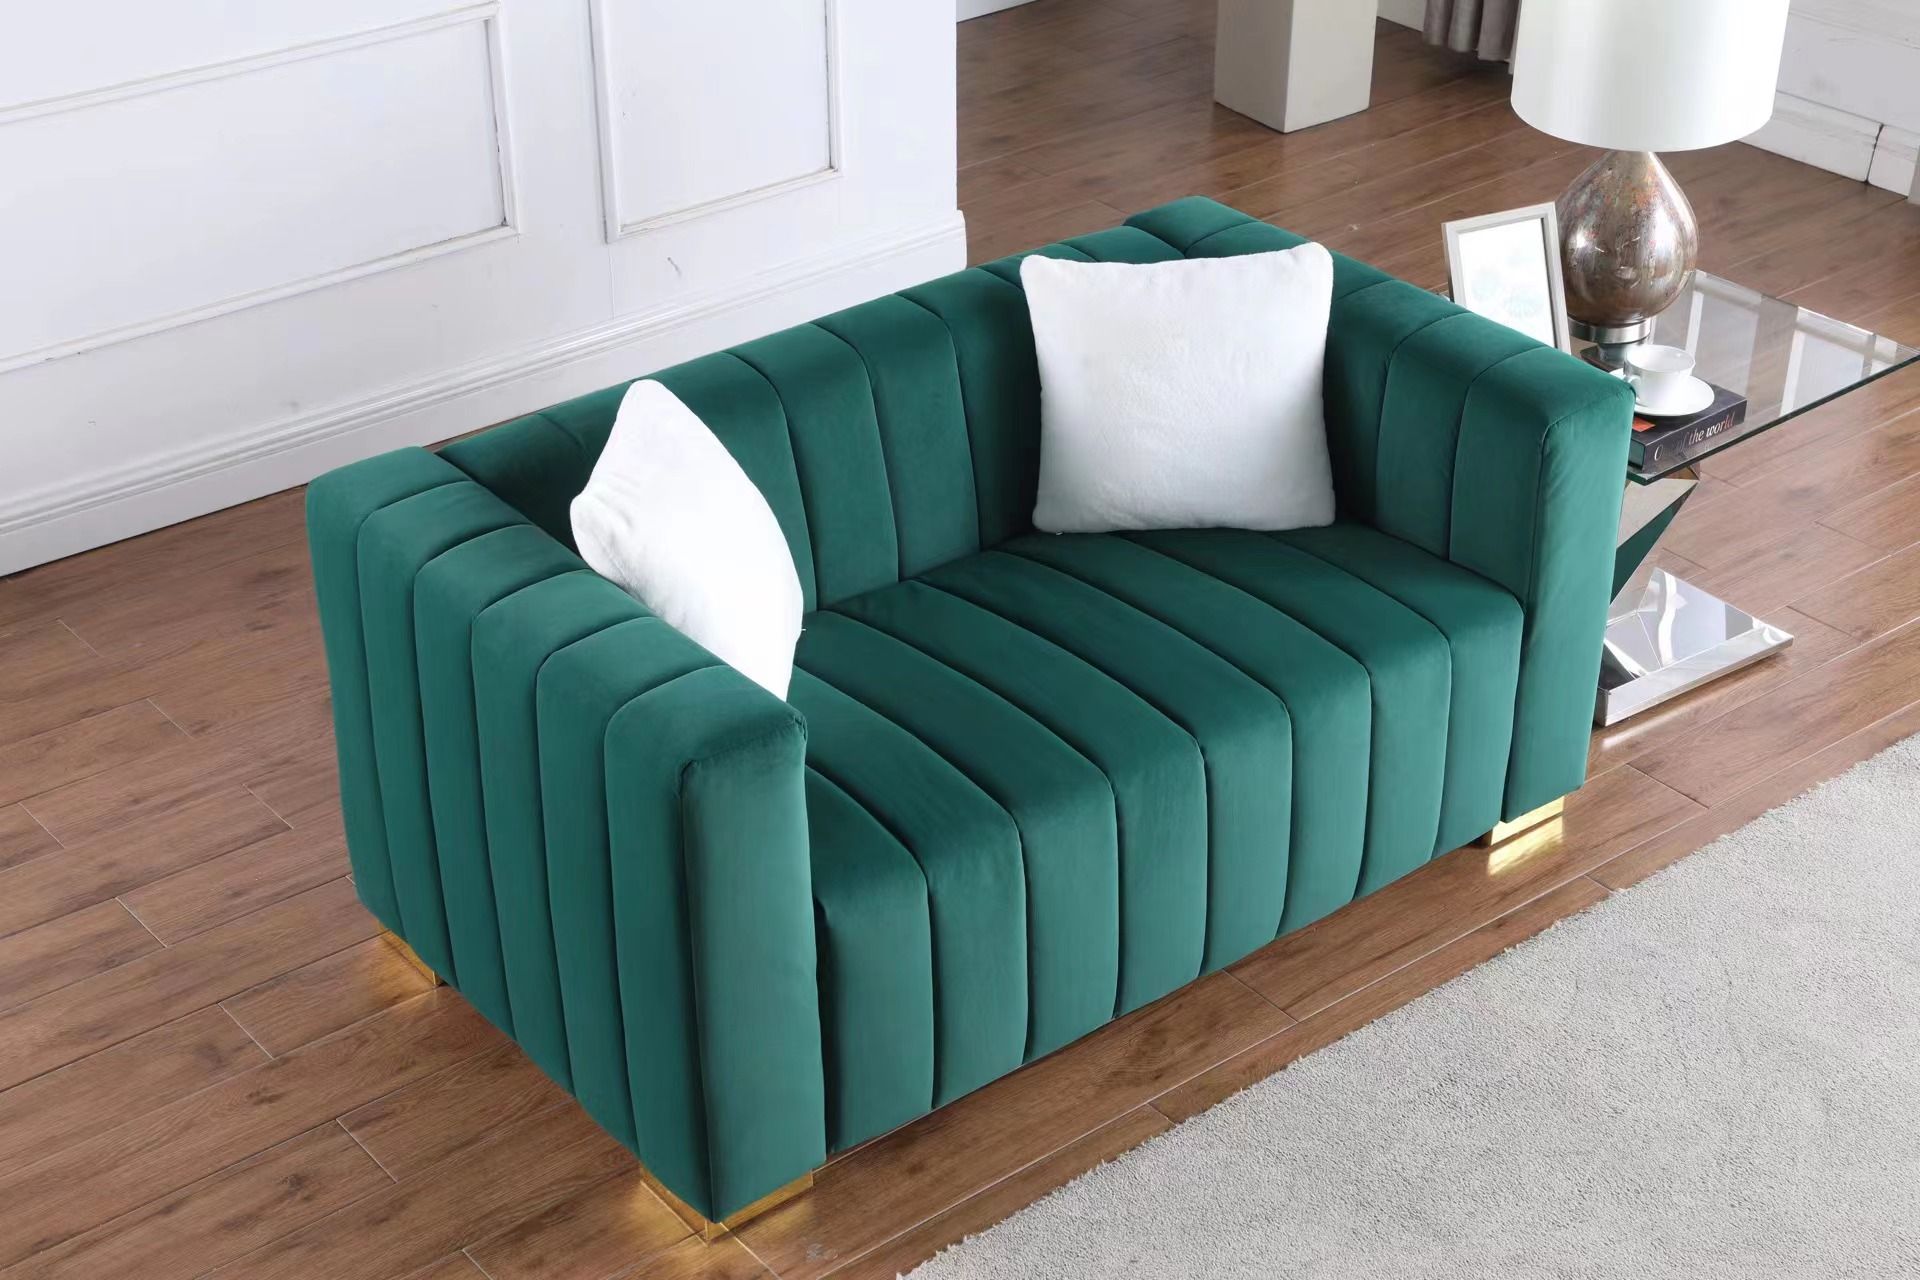 A Modern Channel Sofa Take On A Traditional Chesterfield, Dark Green Color, Loveseater - Dark Green